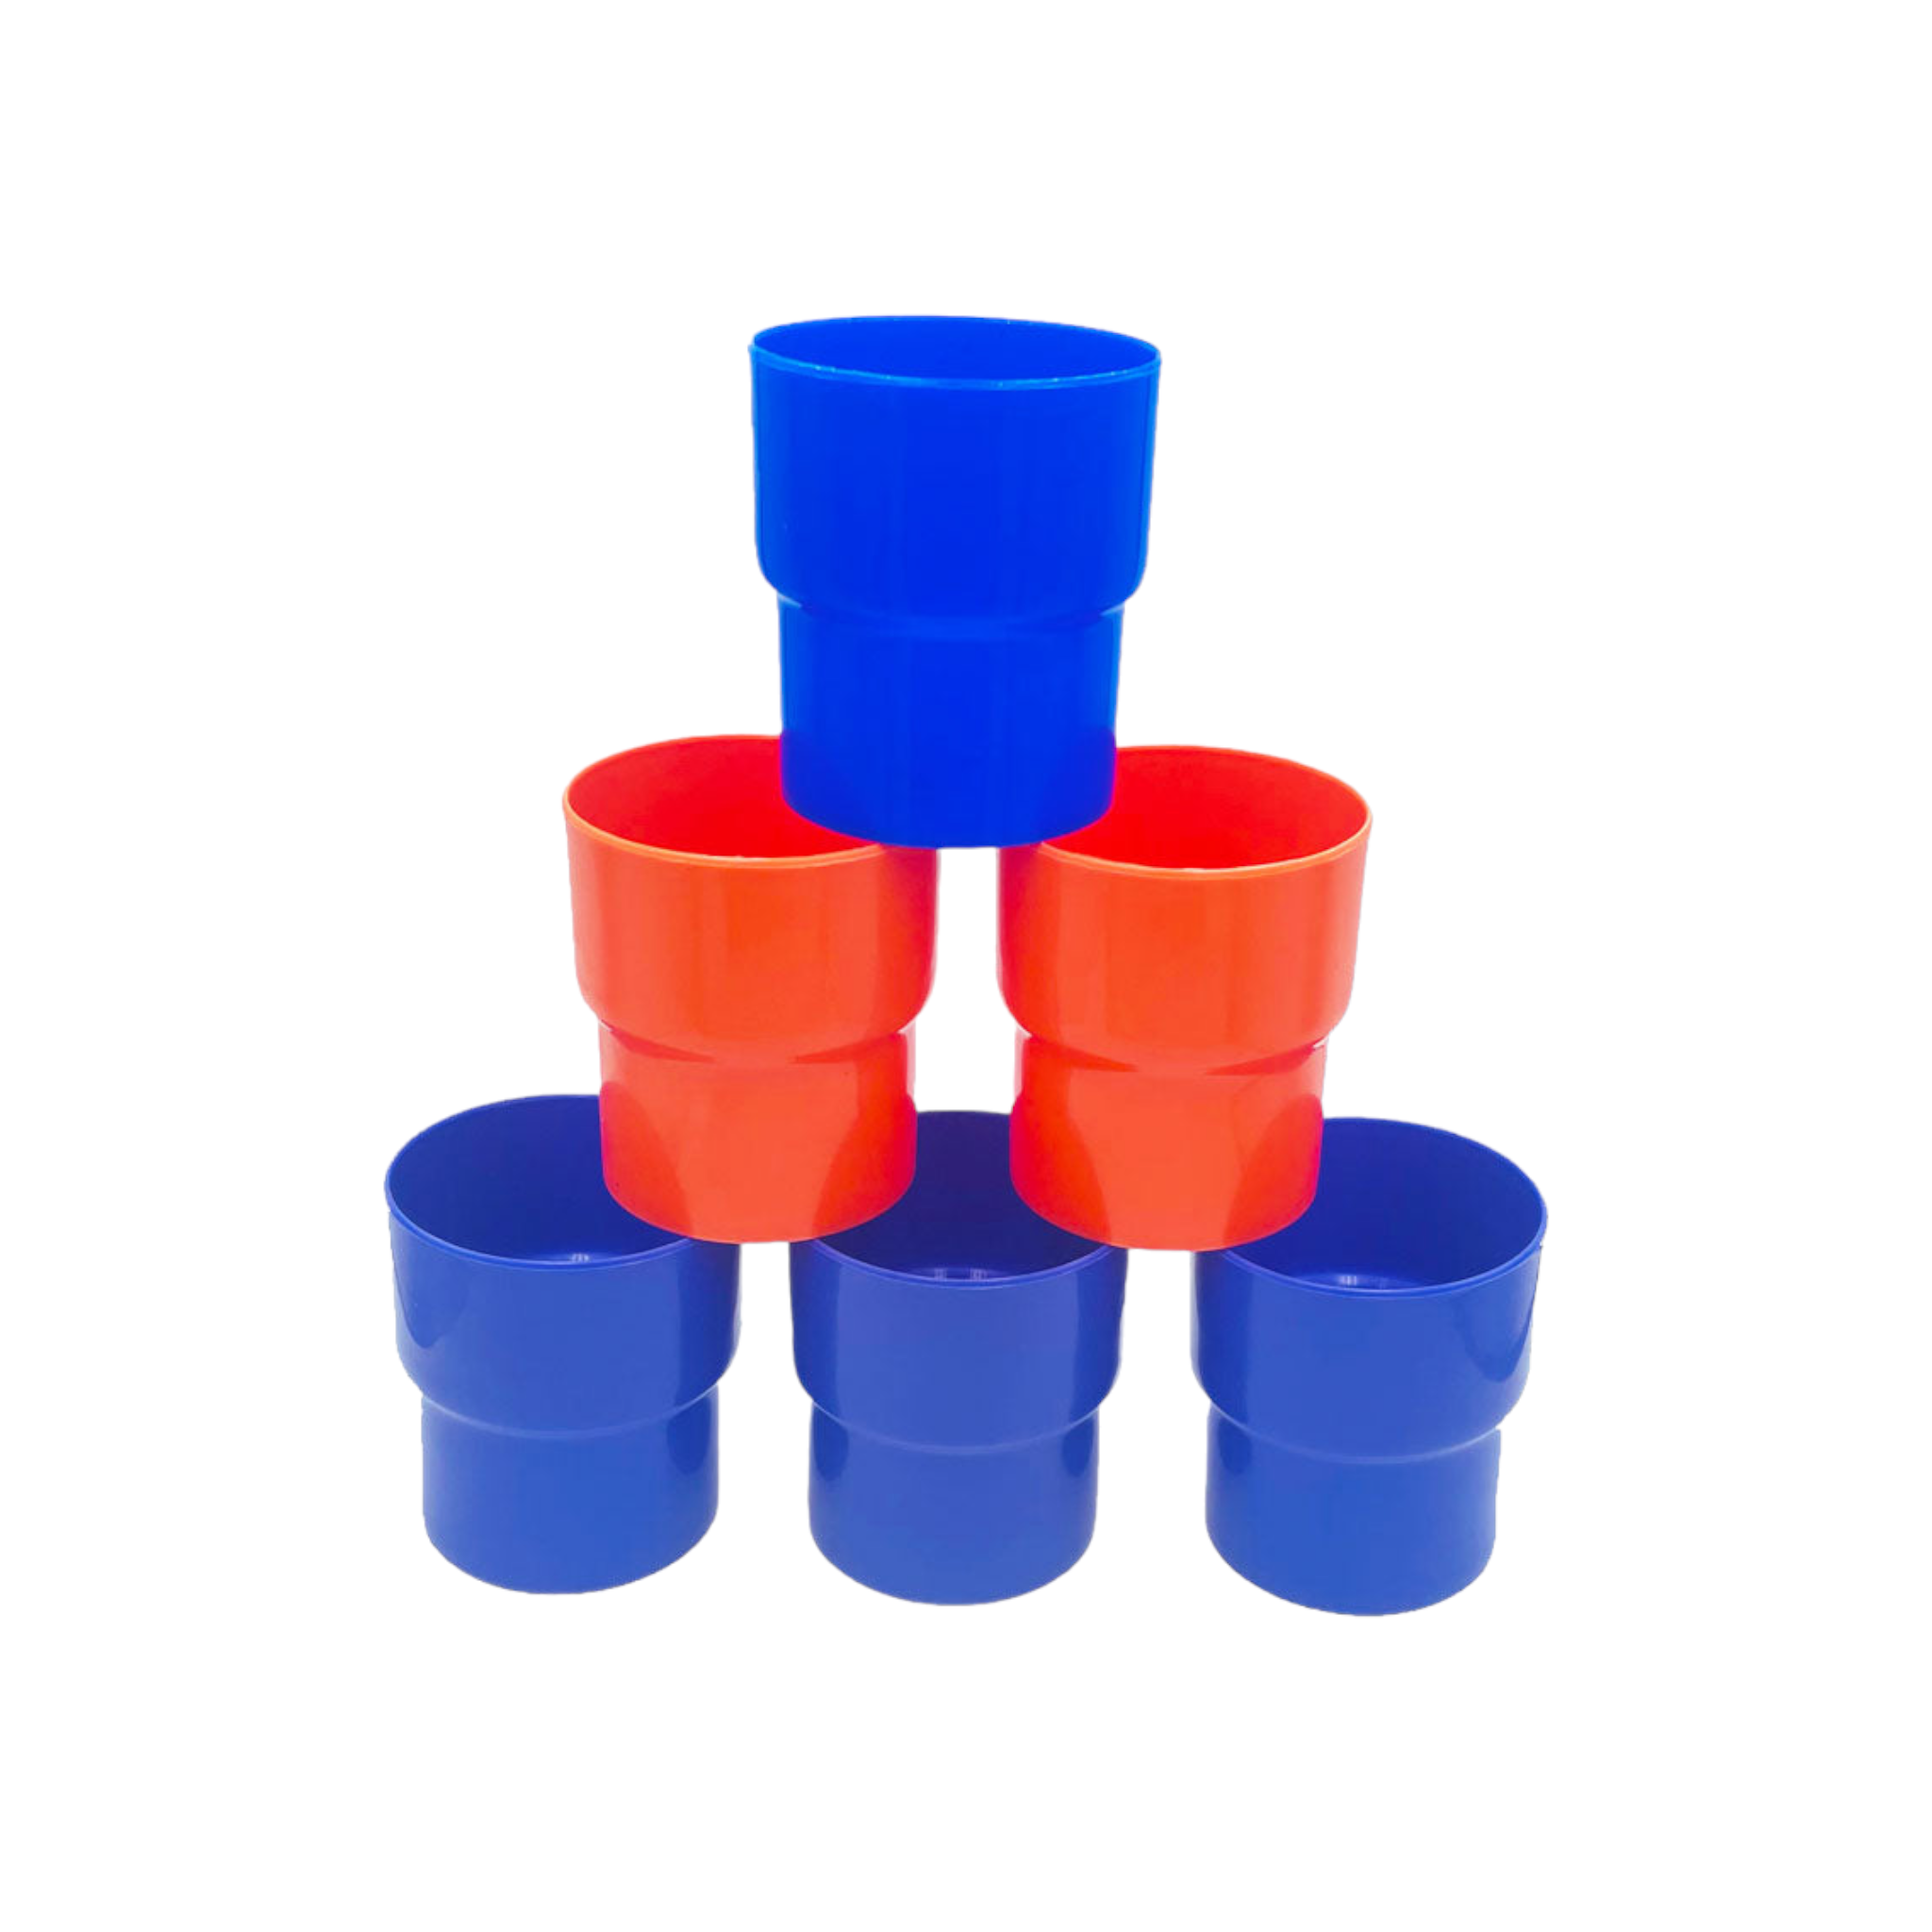 Miss Molly 240ml Plastic Tumbler Stacker Cup Set Reusable 6pack